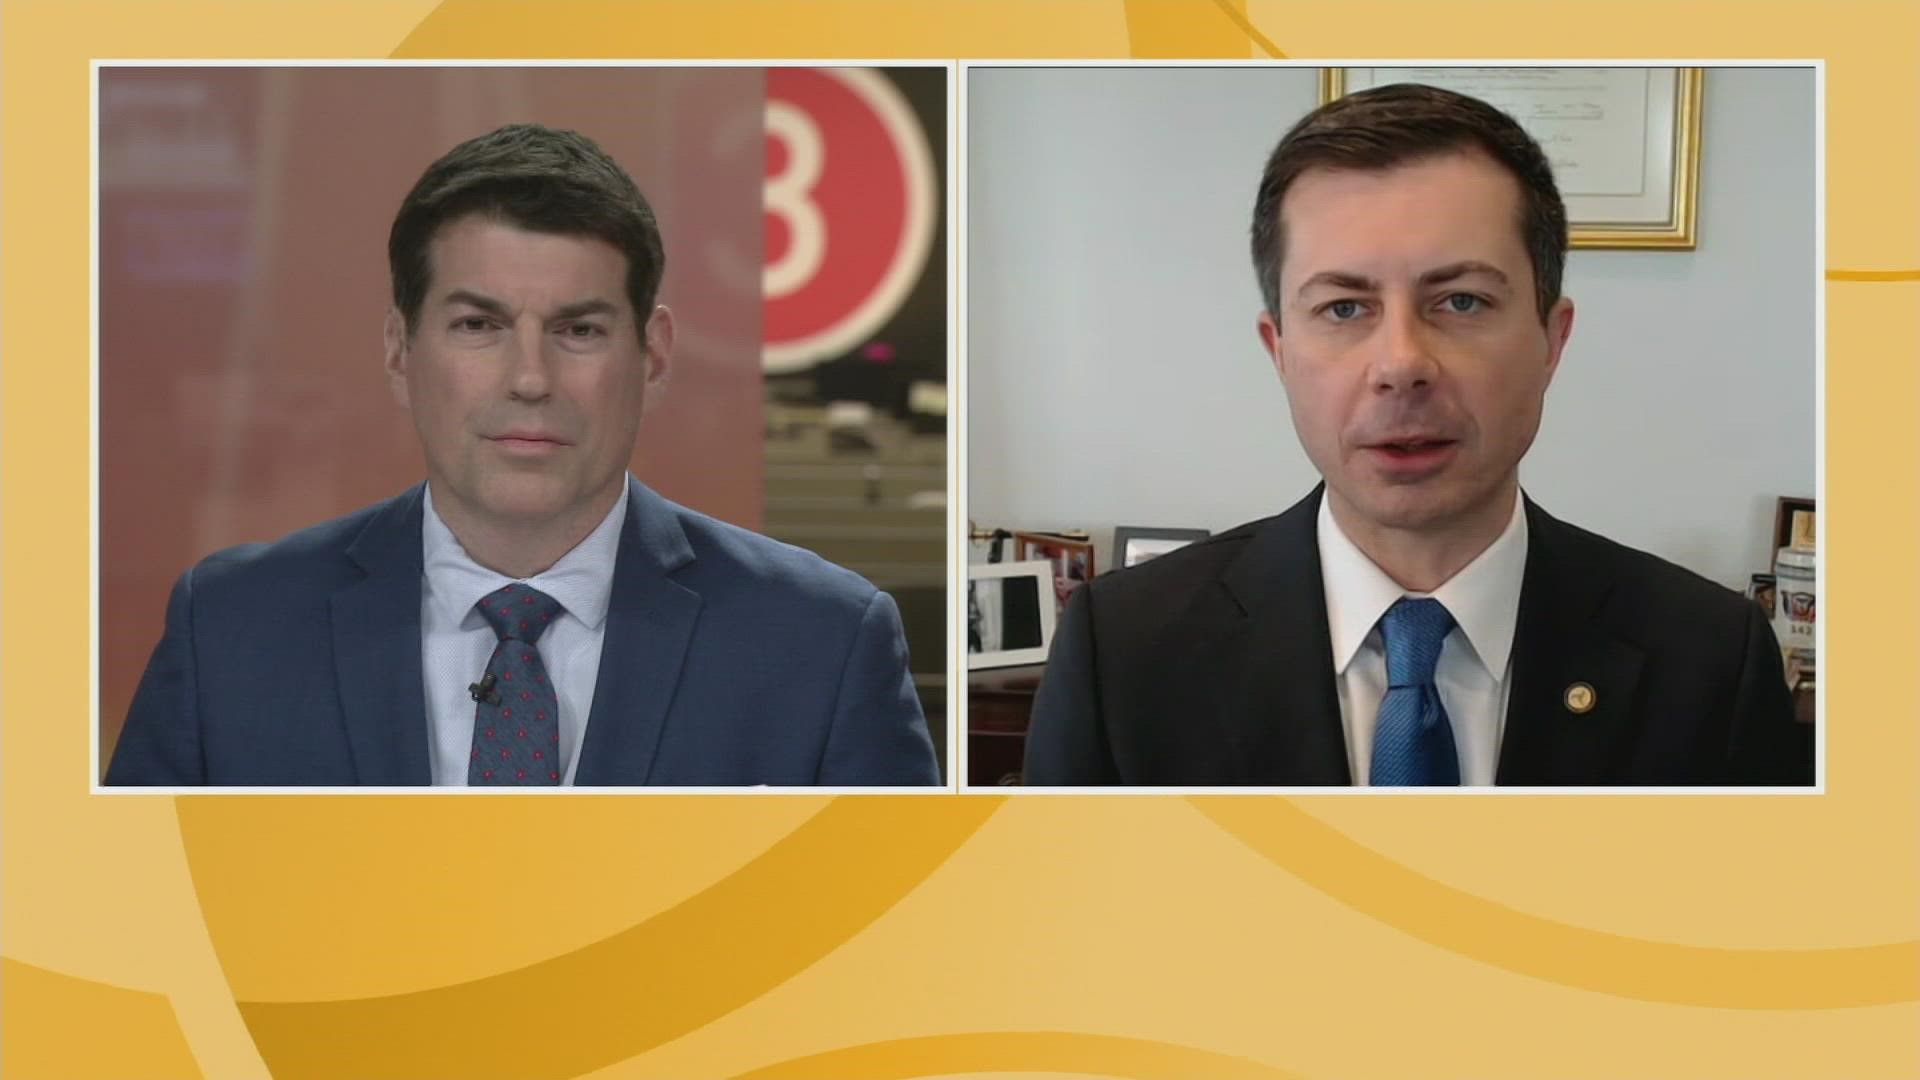 3News' Dave Chudowsky speaks one-on-one with Buttigieg about his calls for action regarding the rail industry.